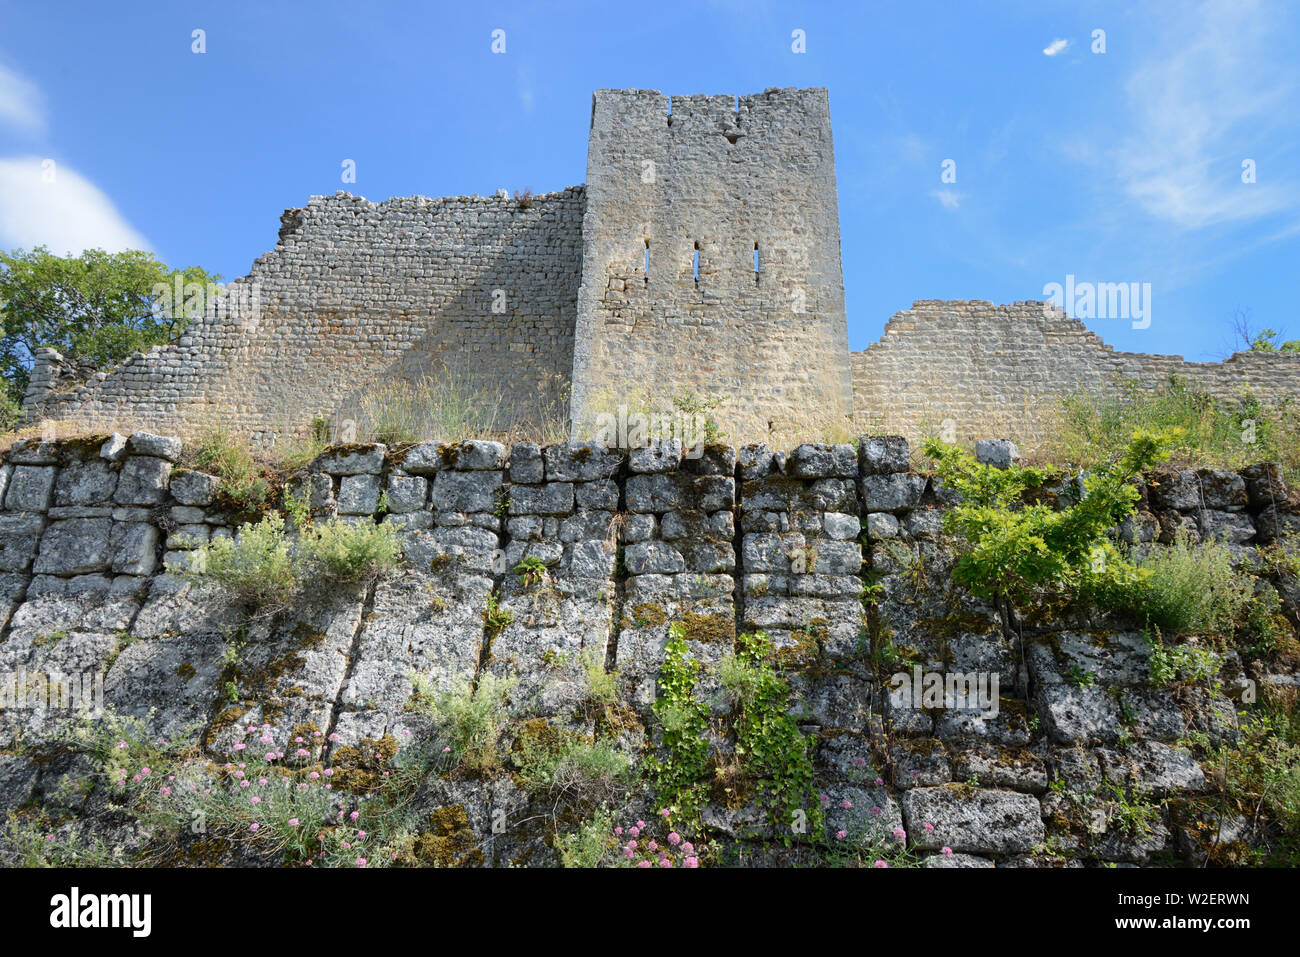 First Medieval Rampart or Defensive Wall & Moat of the Fort de Buoux, Buoux Fort or Fortress, Luberon Provence France Stock Photo